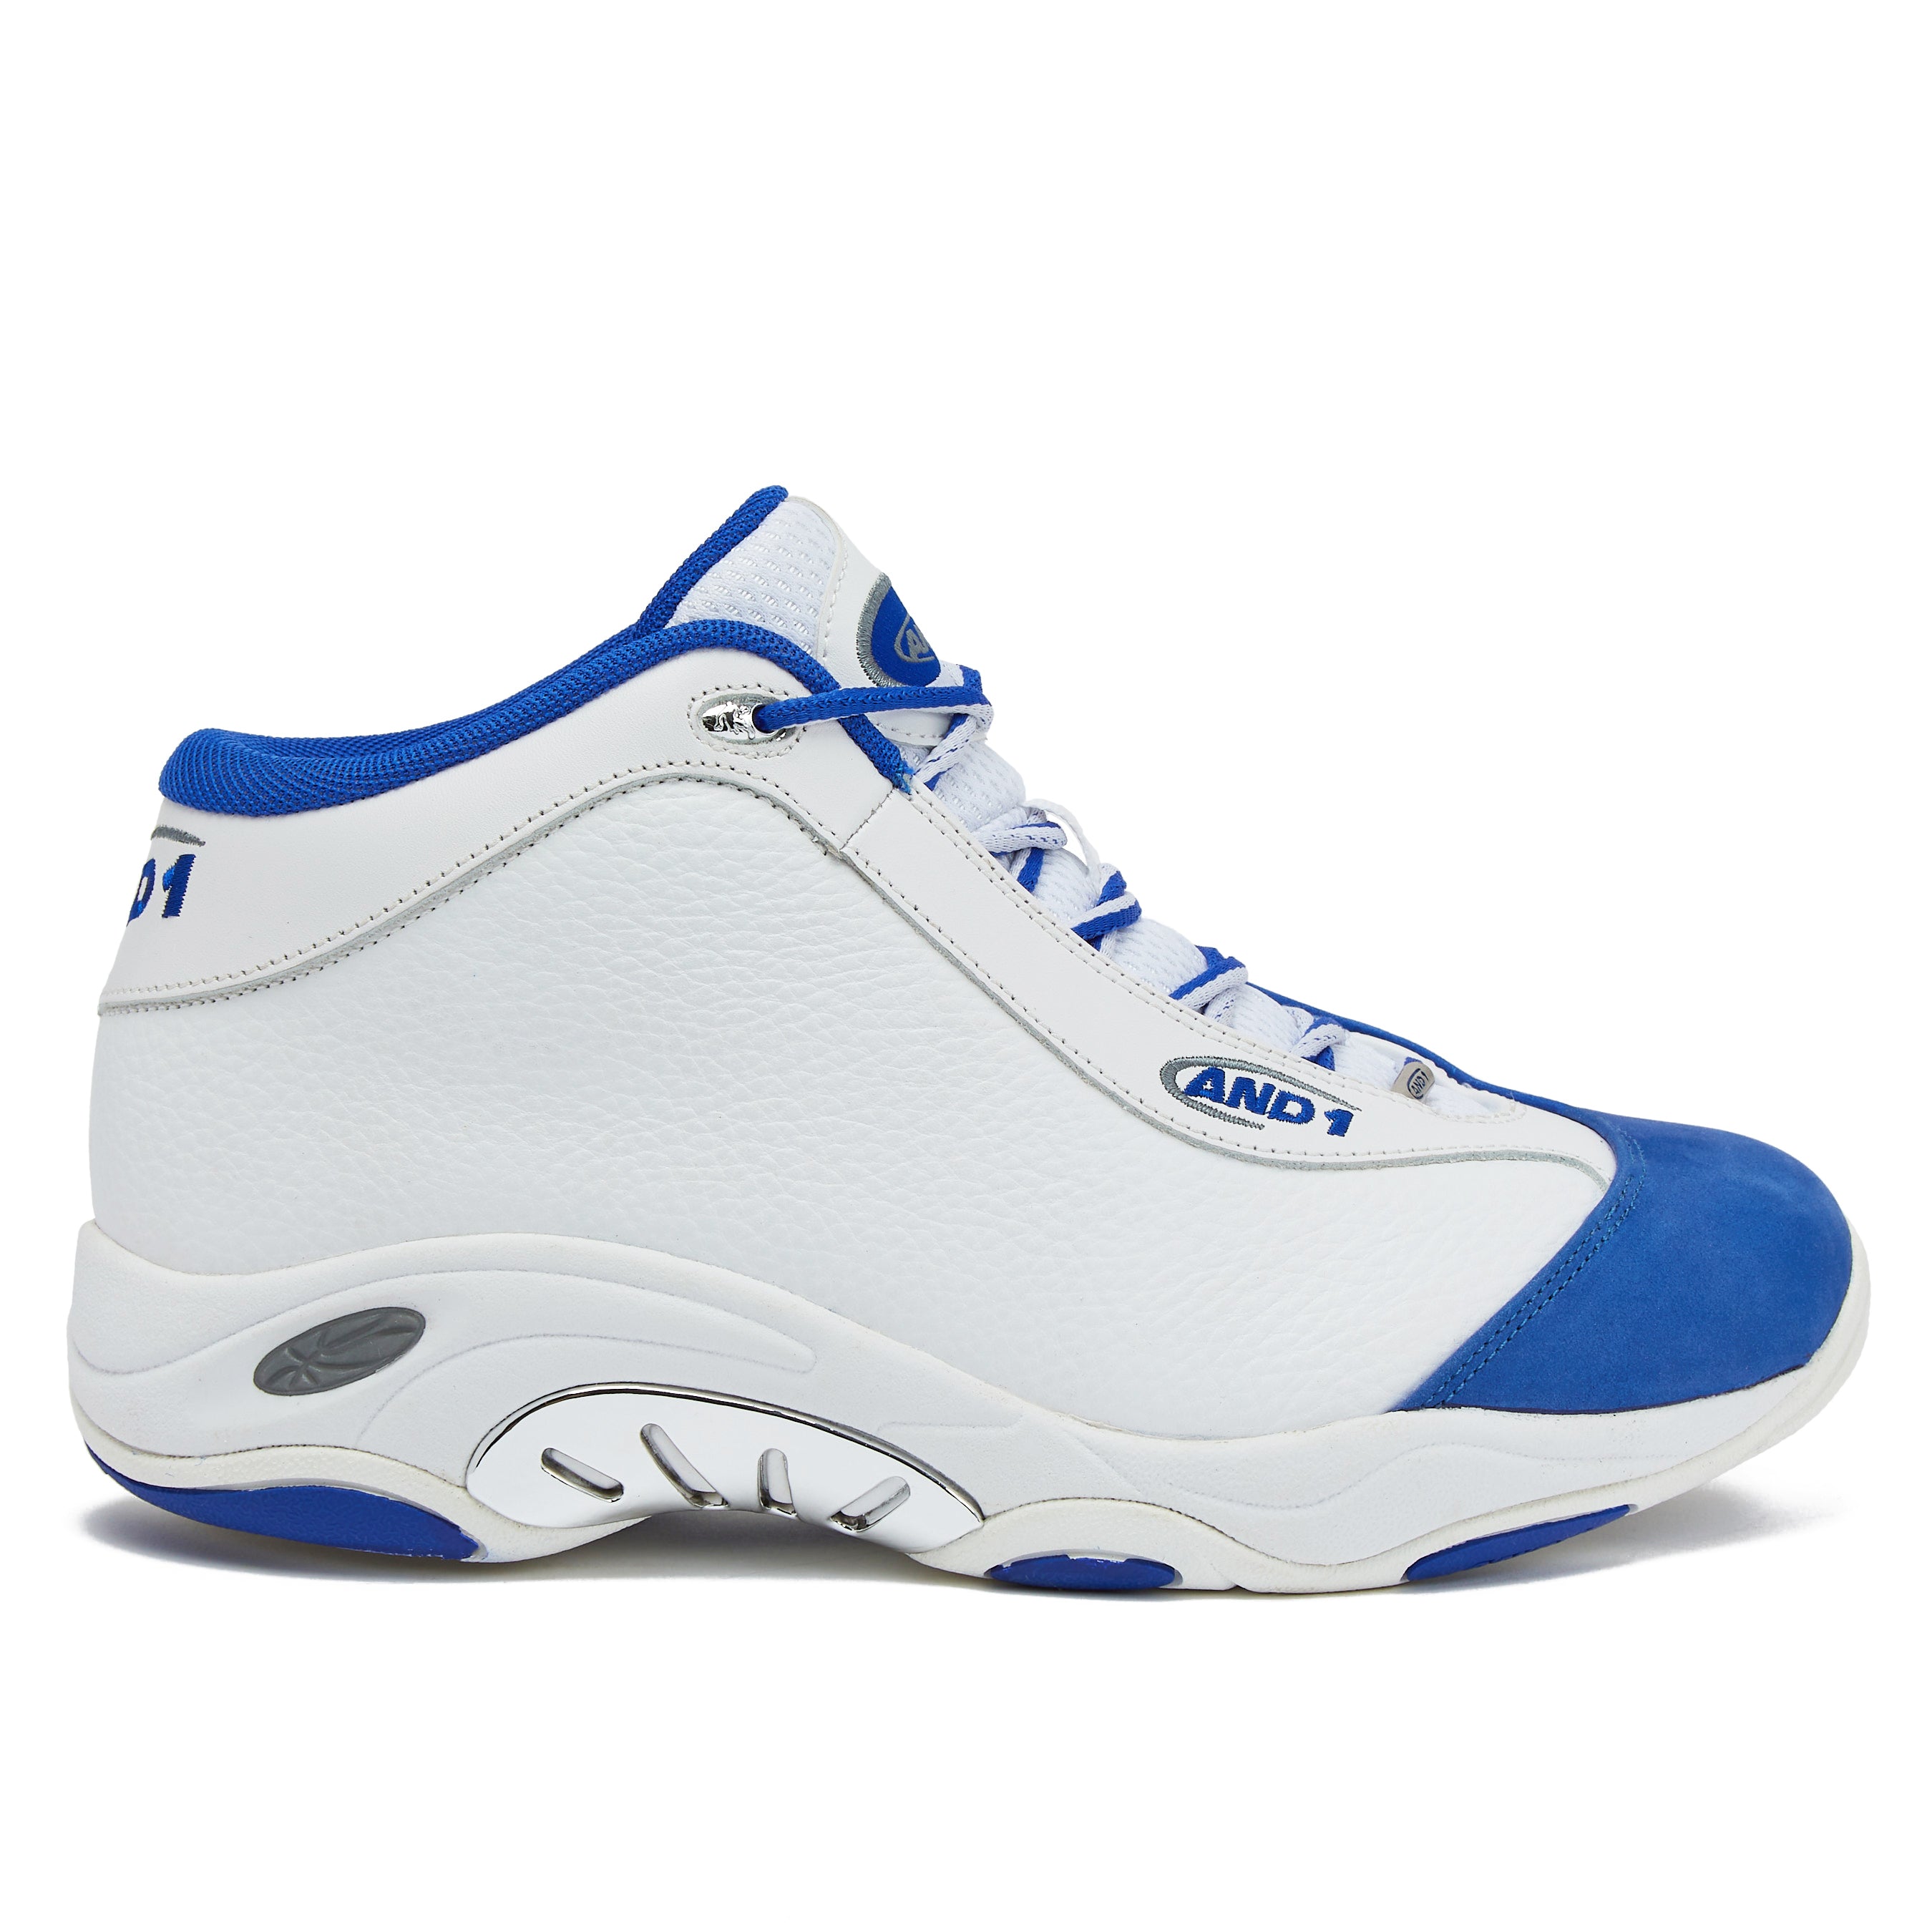 AND1 Rise Mens Basketball Shoes  Retro Basketball Sneakers for Men –